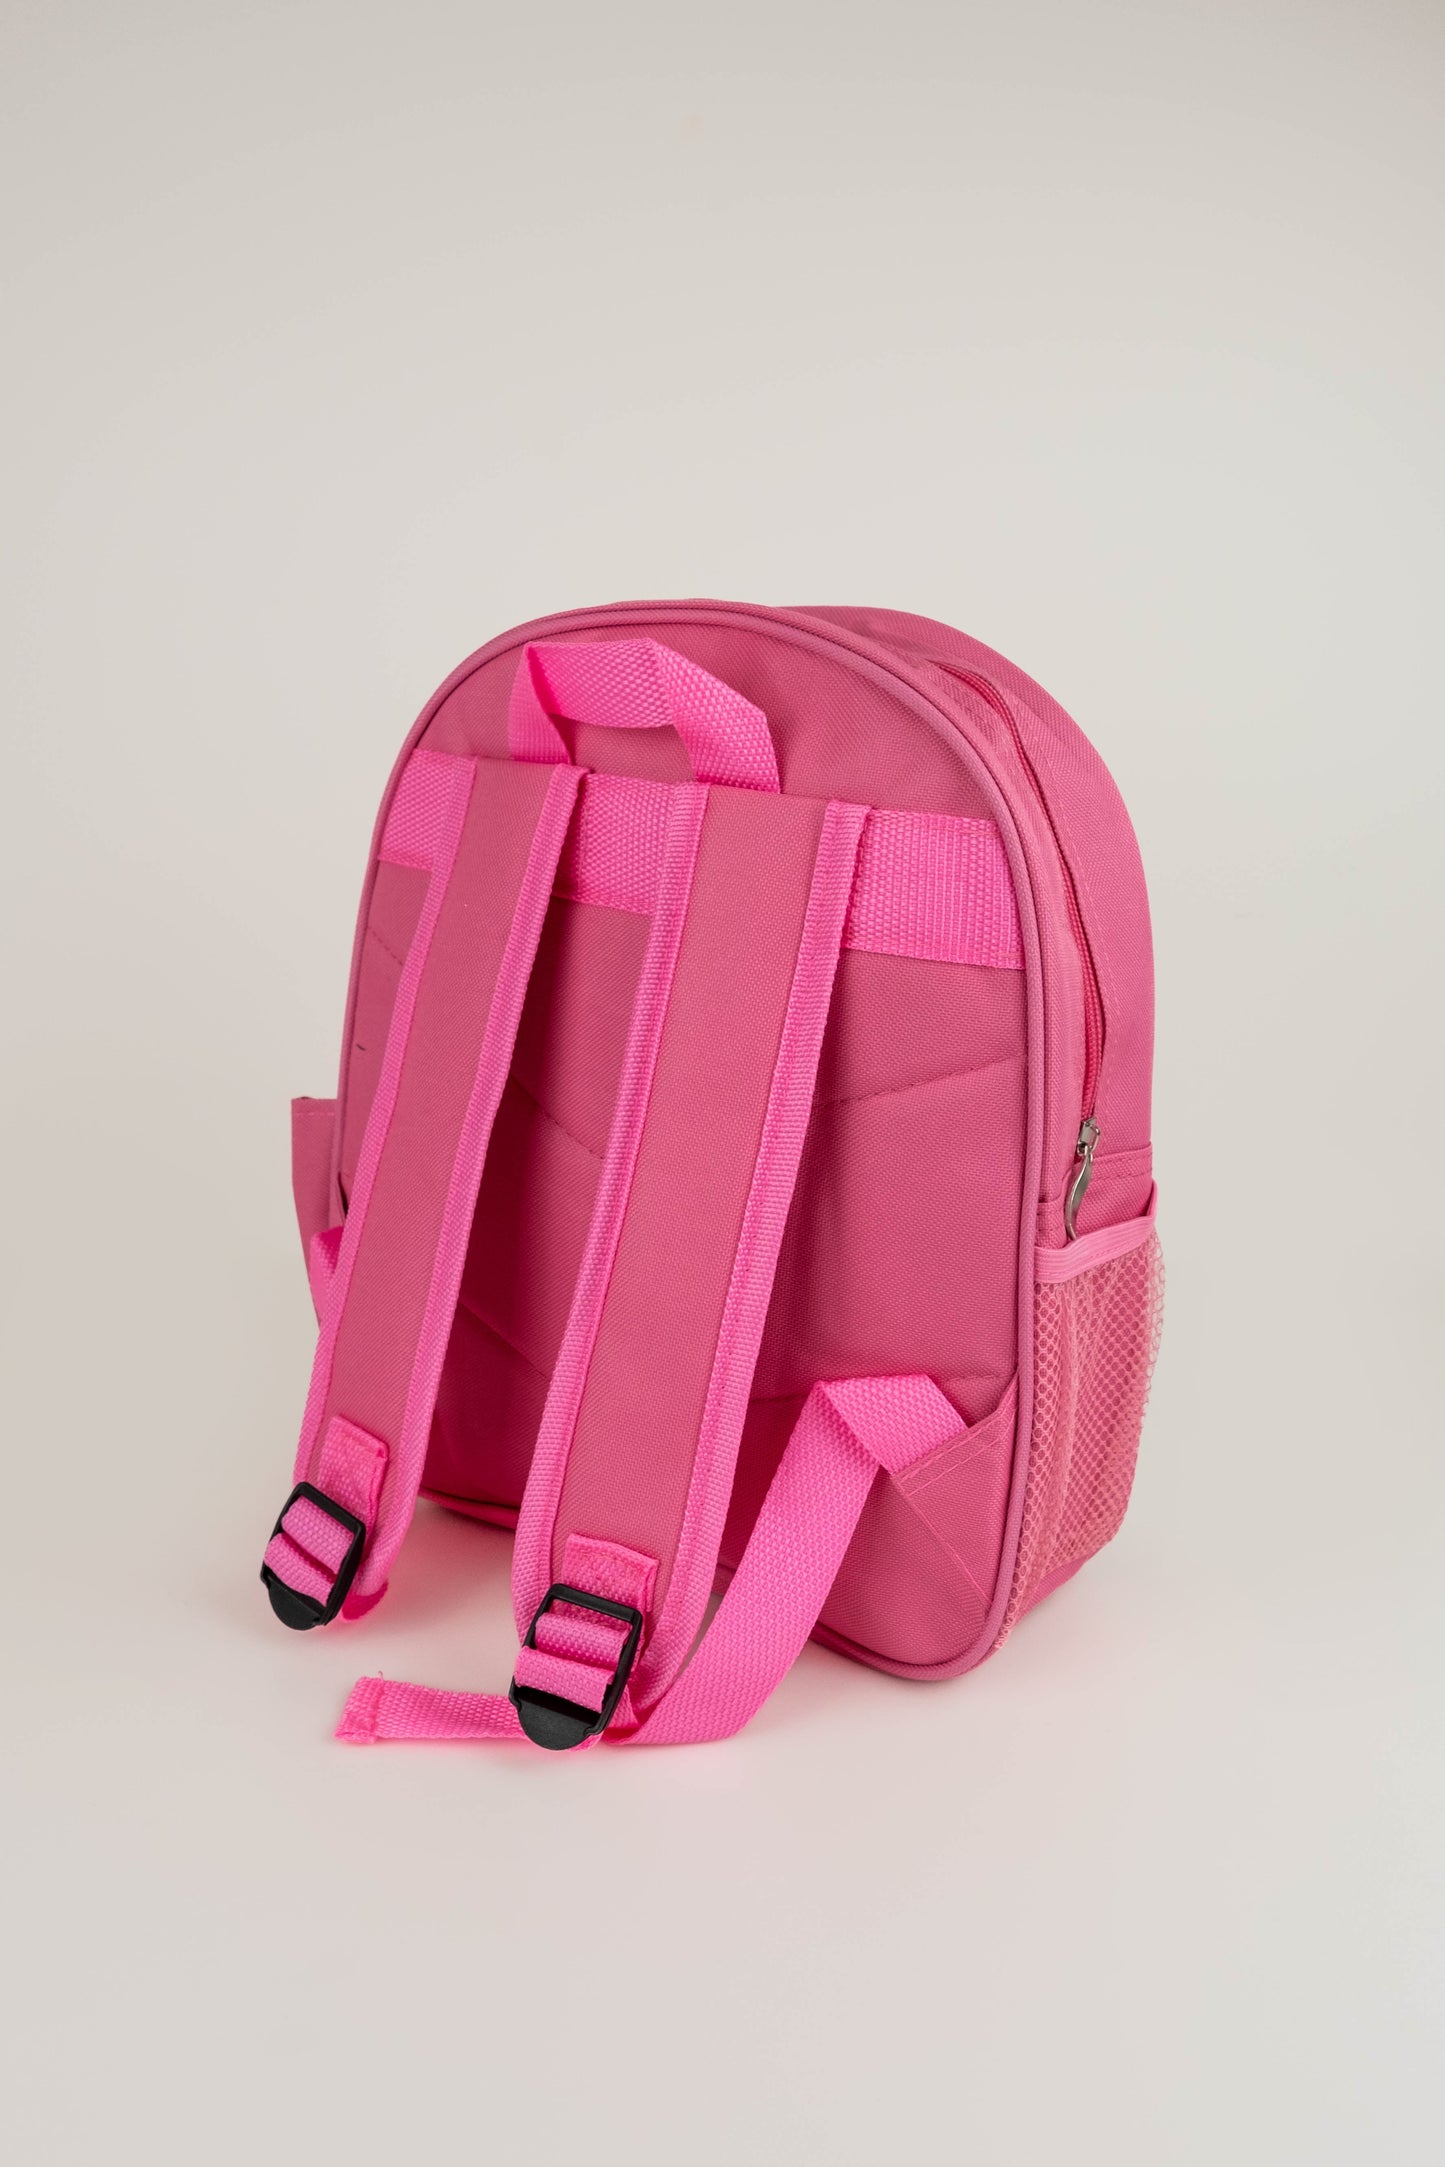 Children’s Personalised Backpack - Gaming Design - Pink